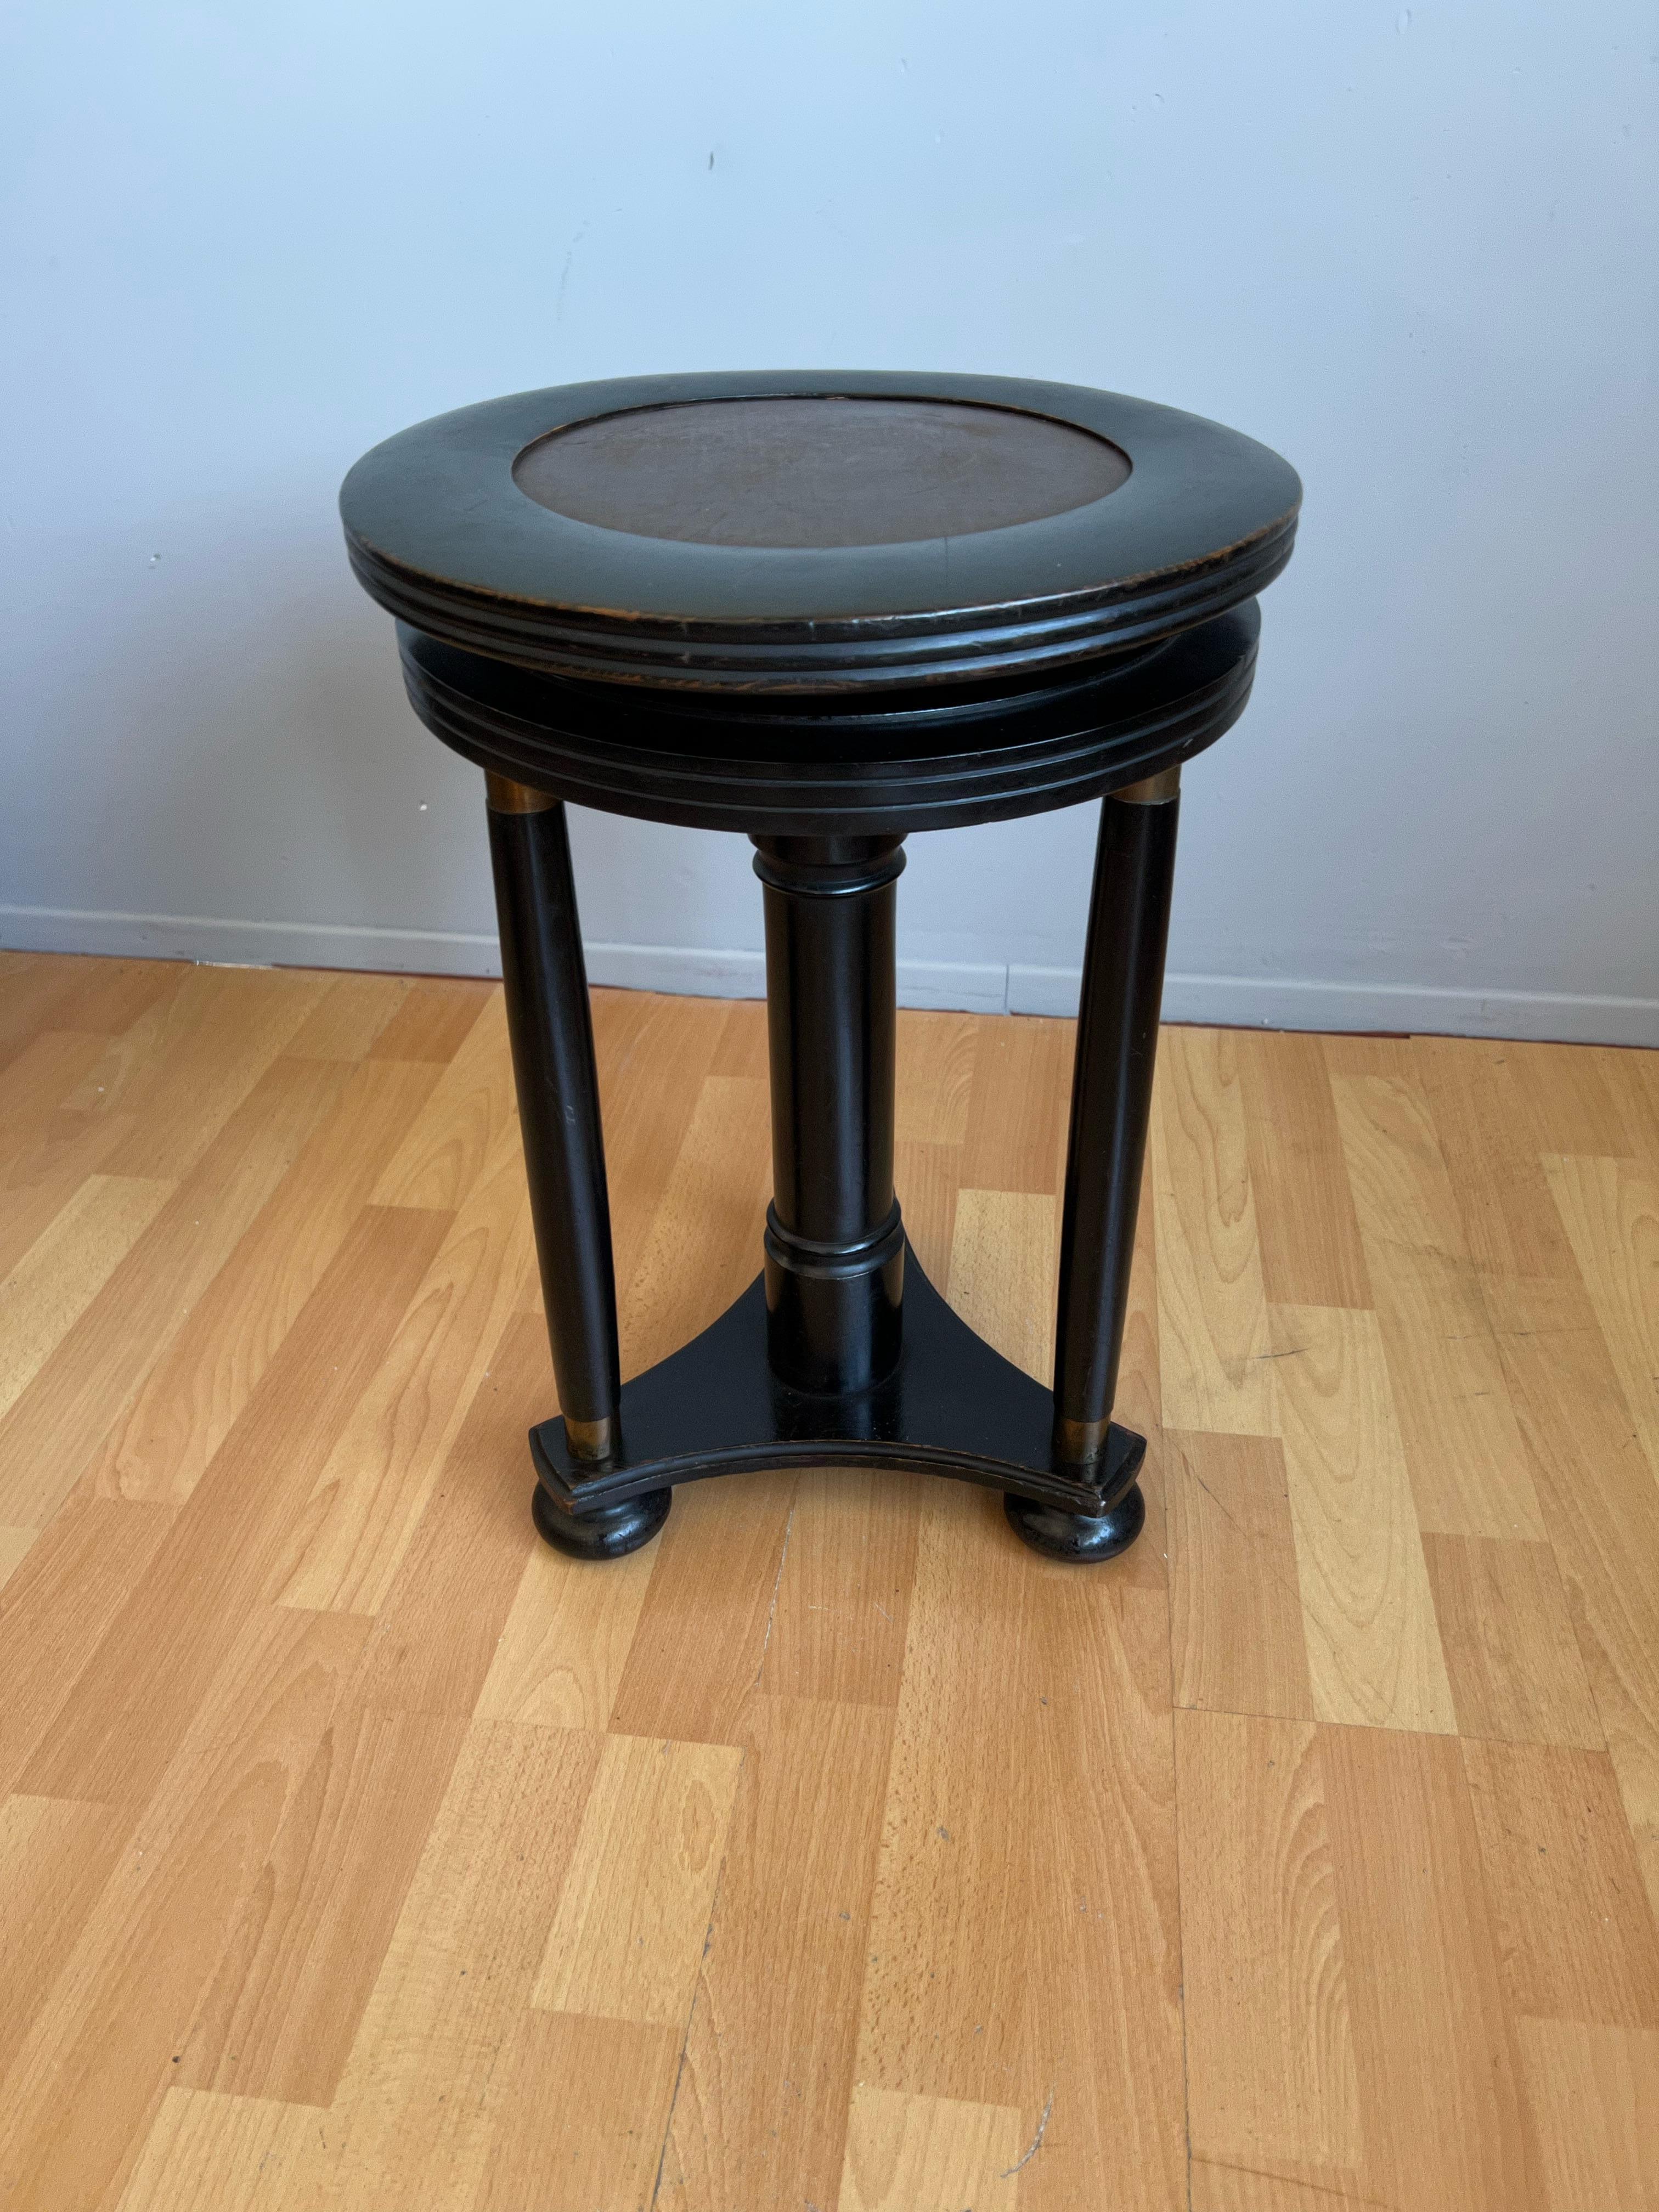 Stylish Blackened Wooden and Brass Art Deco Desk or Piano Swivel Stool, ca 1900 For Sale 8